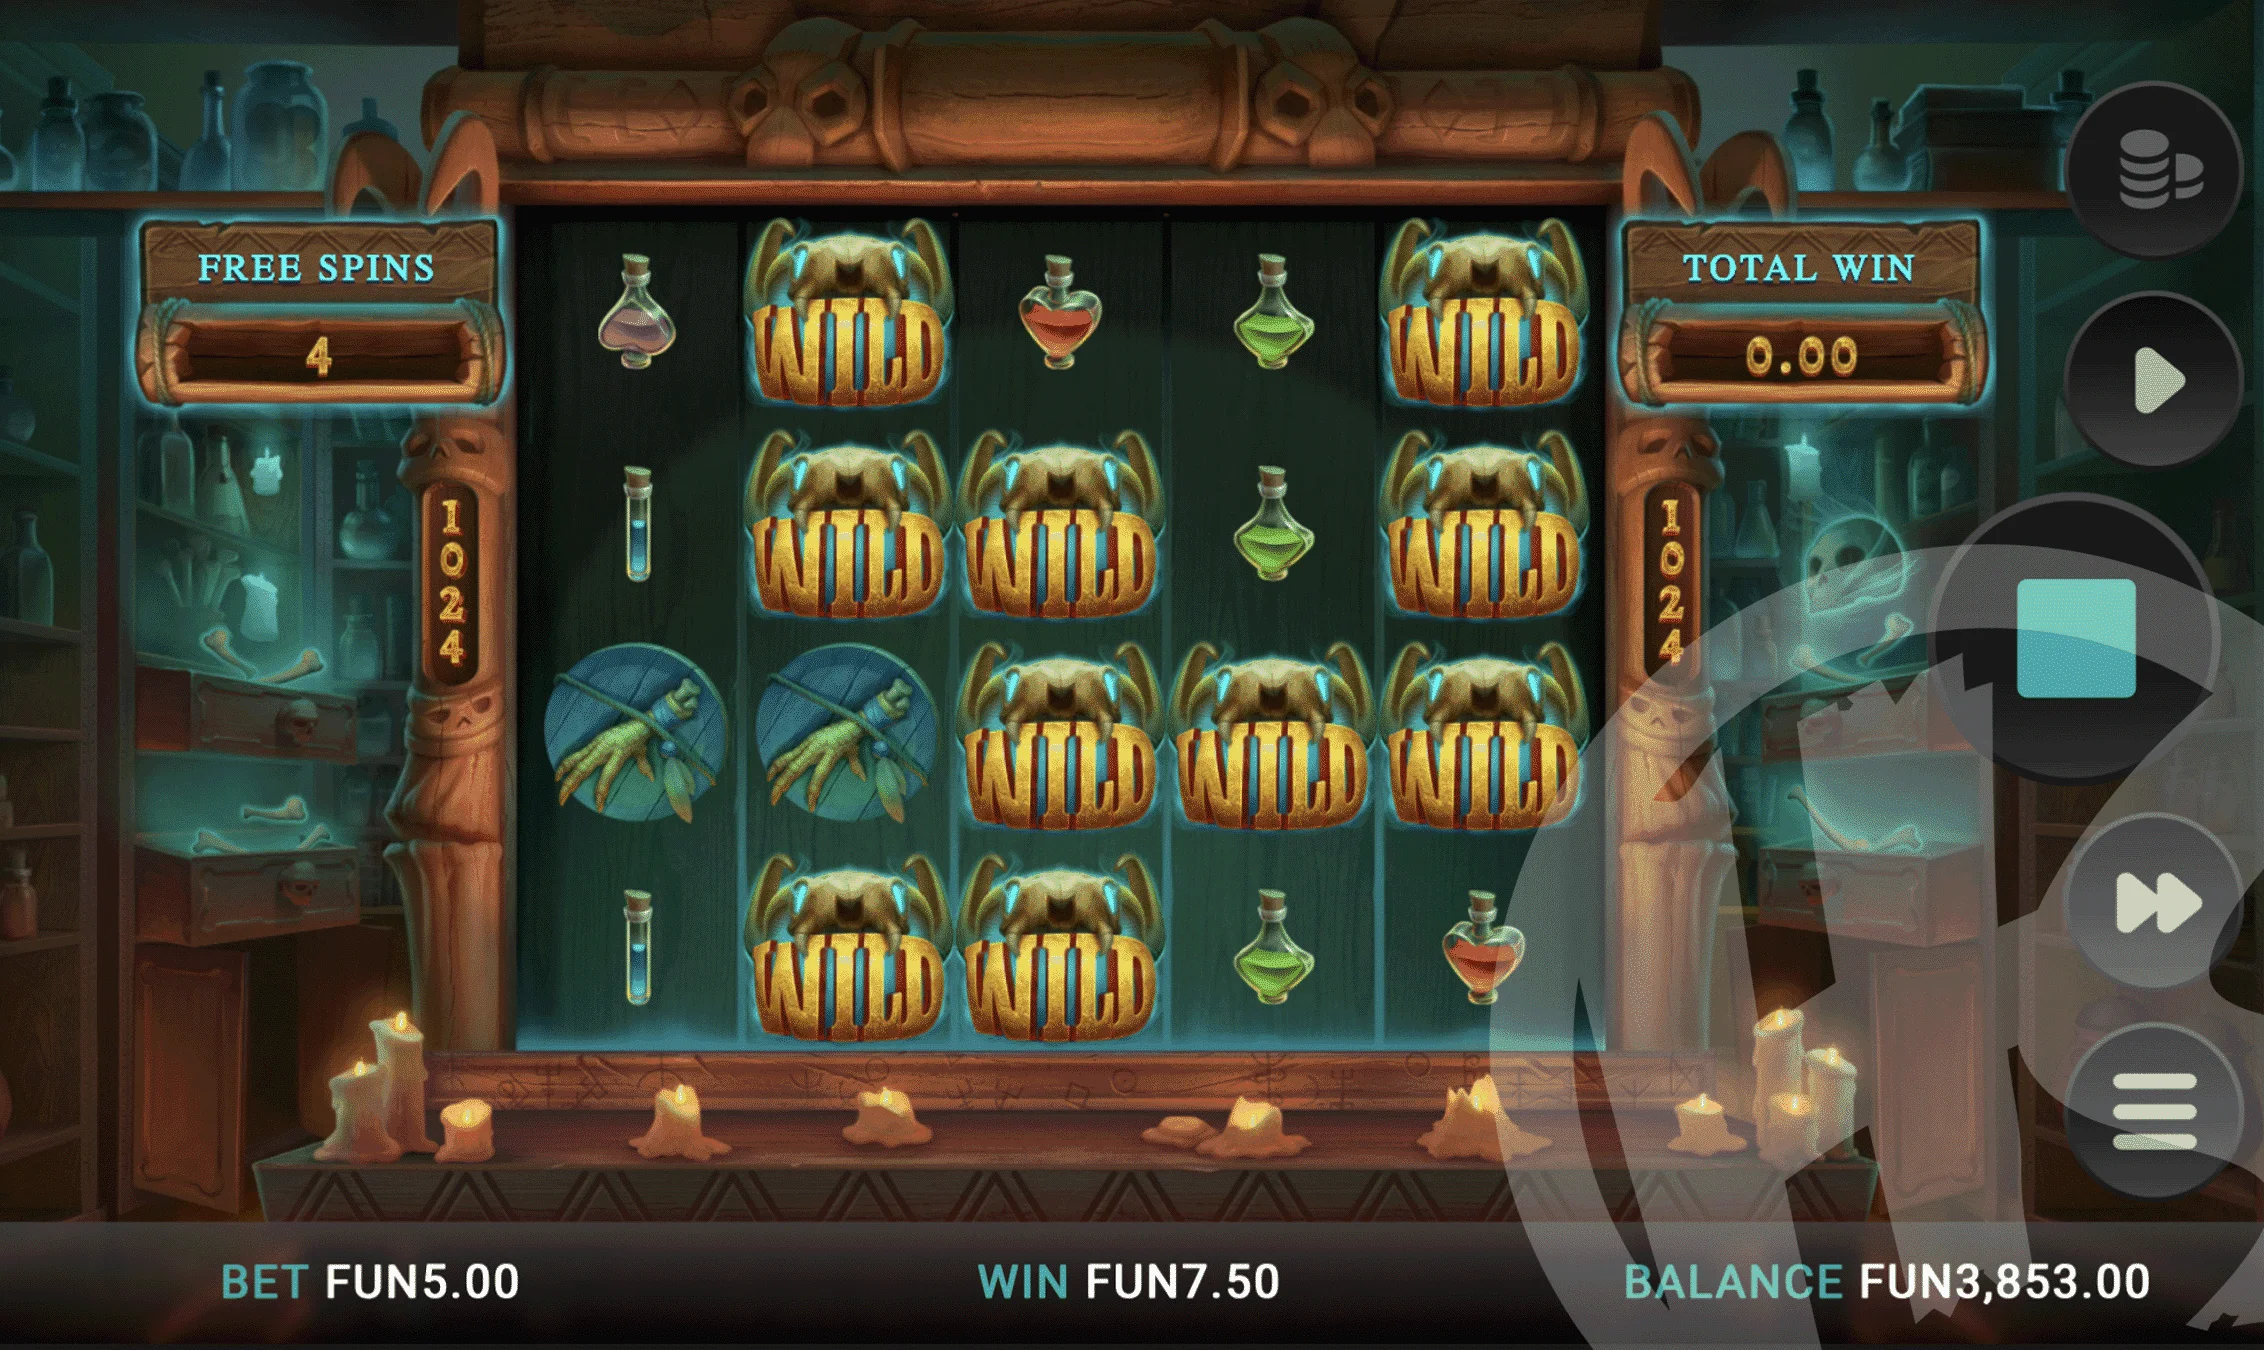 Positions are Marked For the Duration of Free Spins